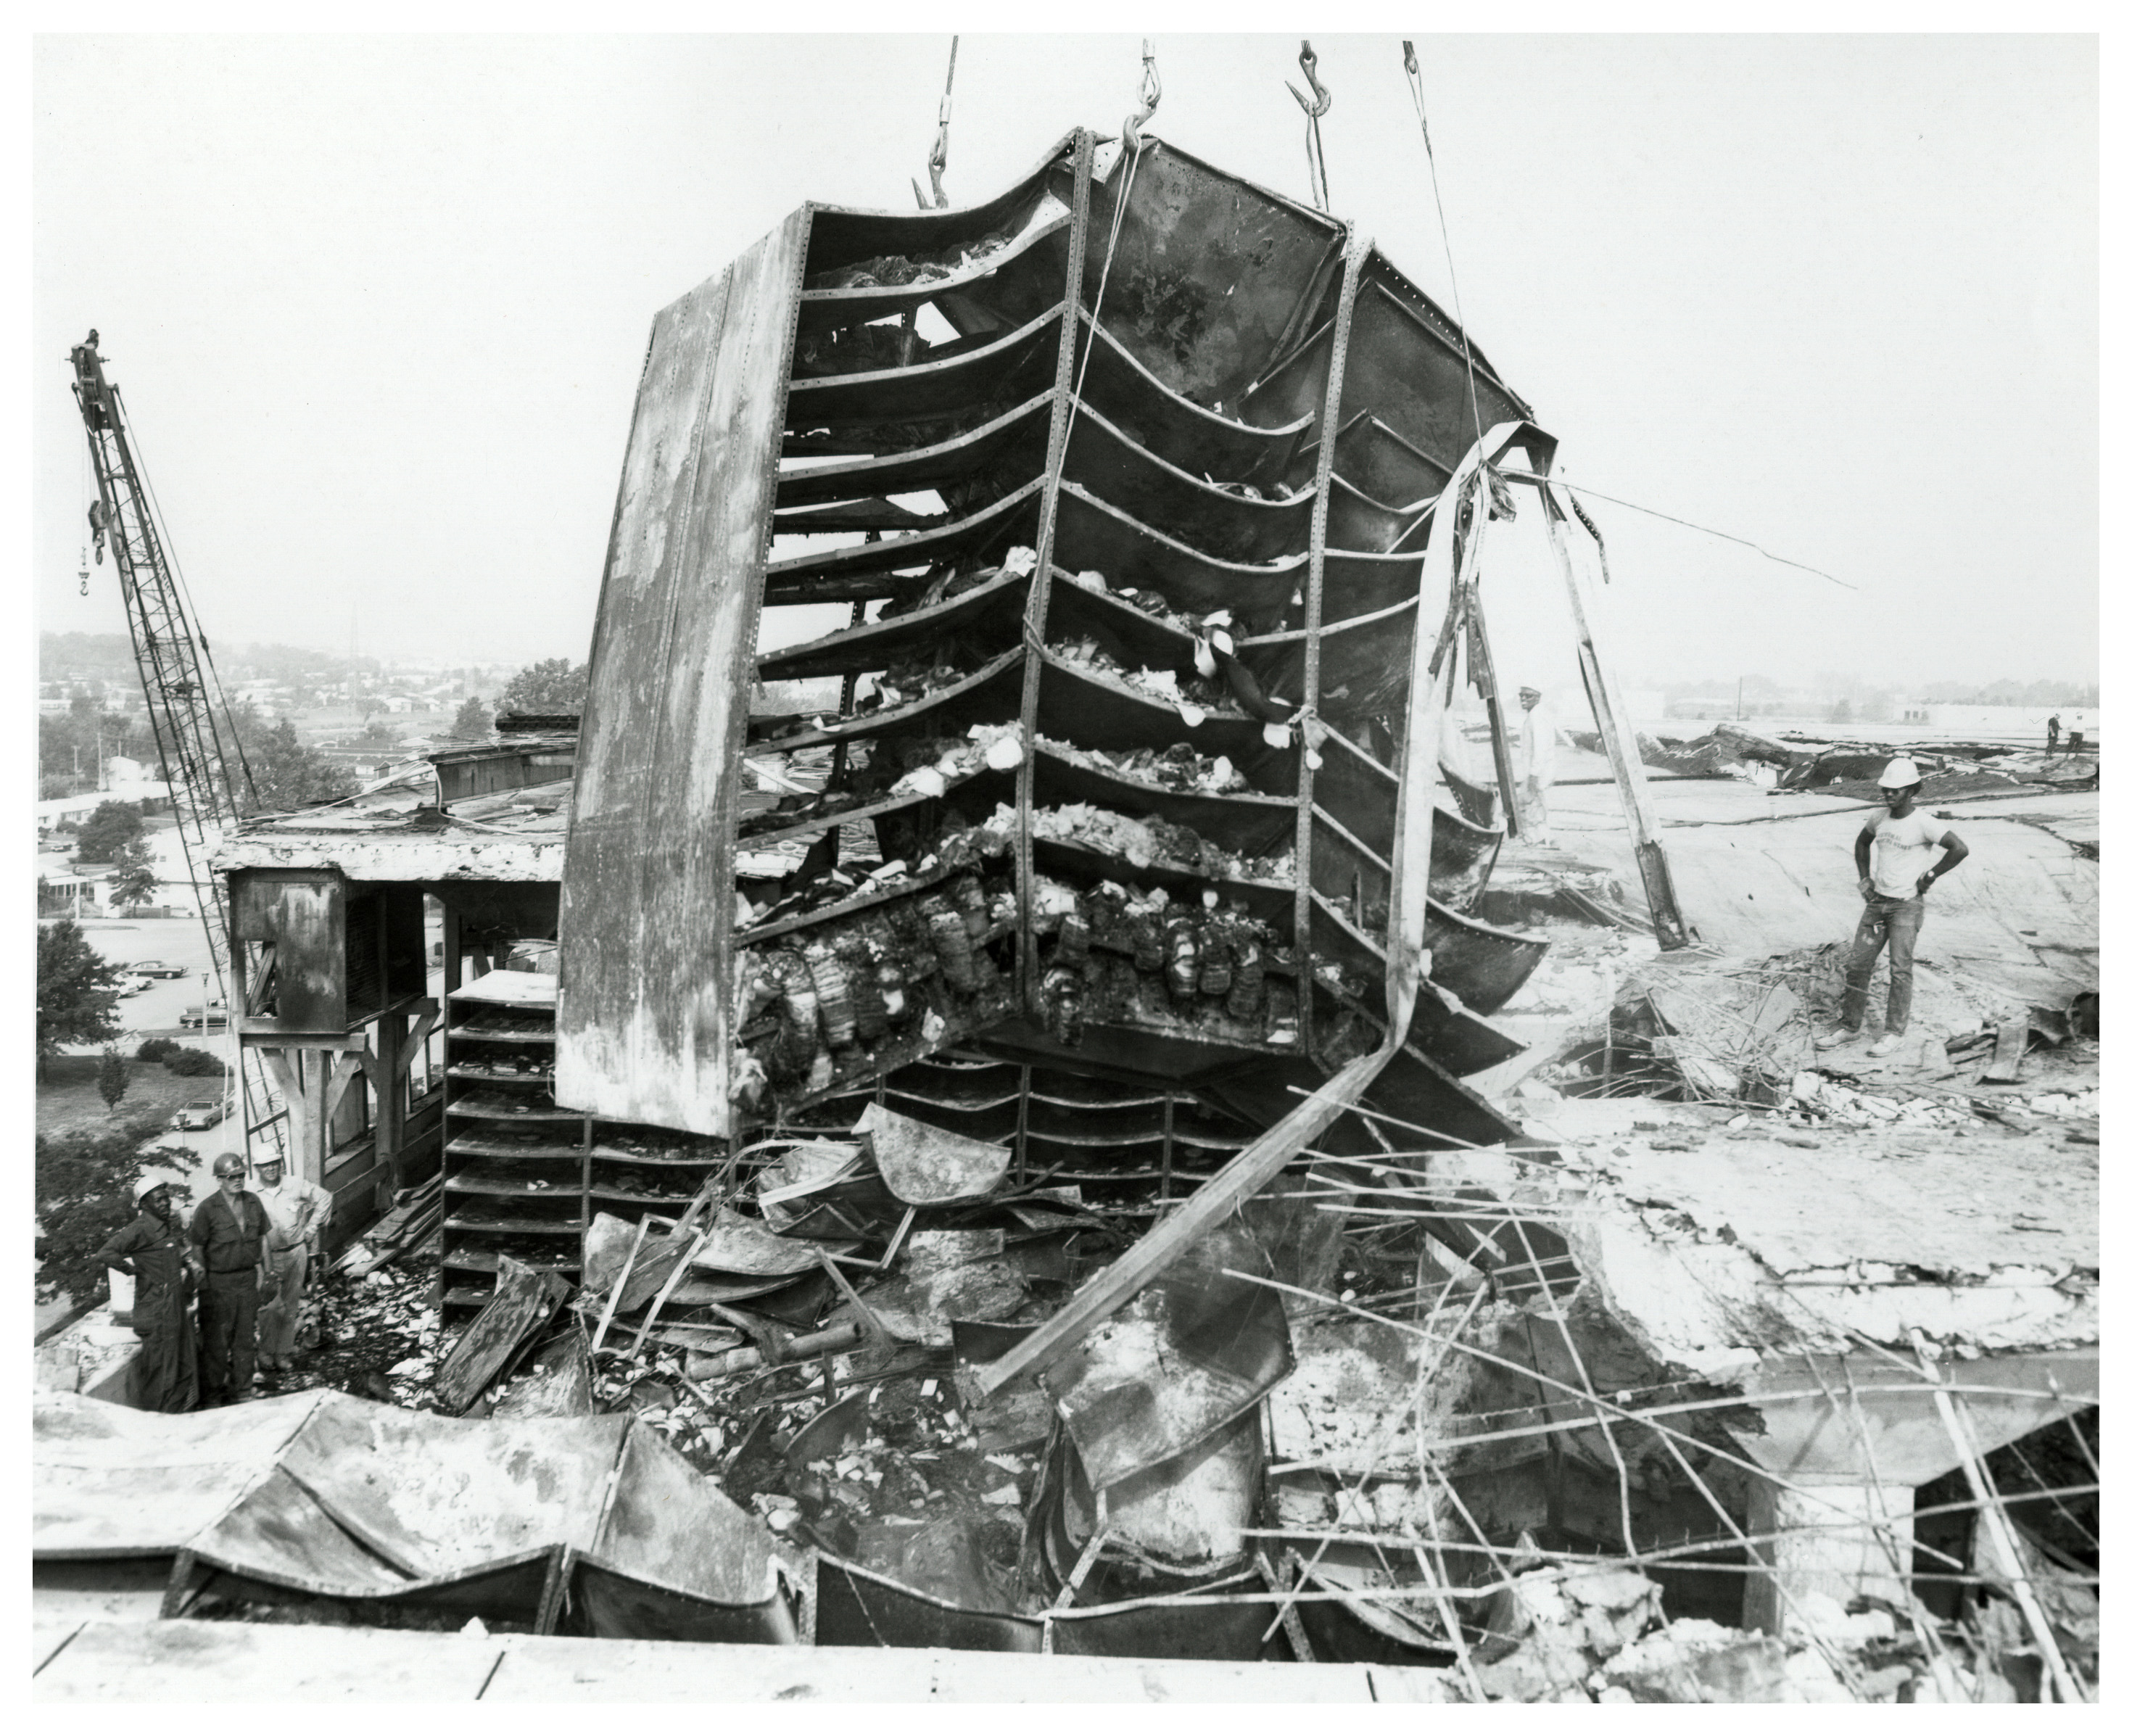 A9. July 12, 1973 National Personnel Records Center fire | t311